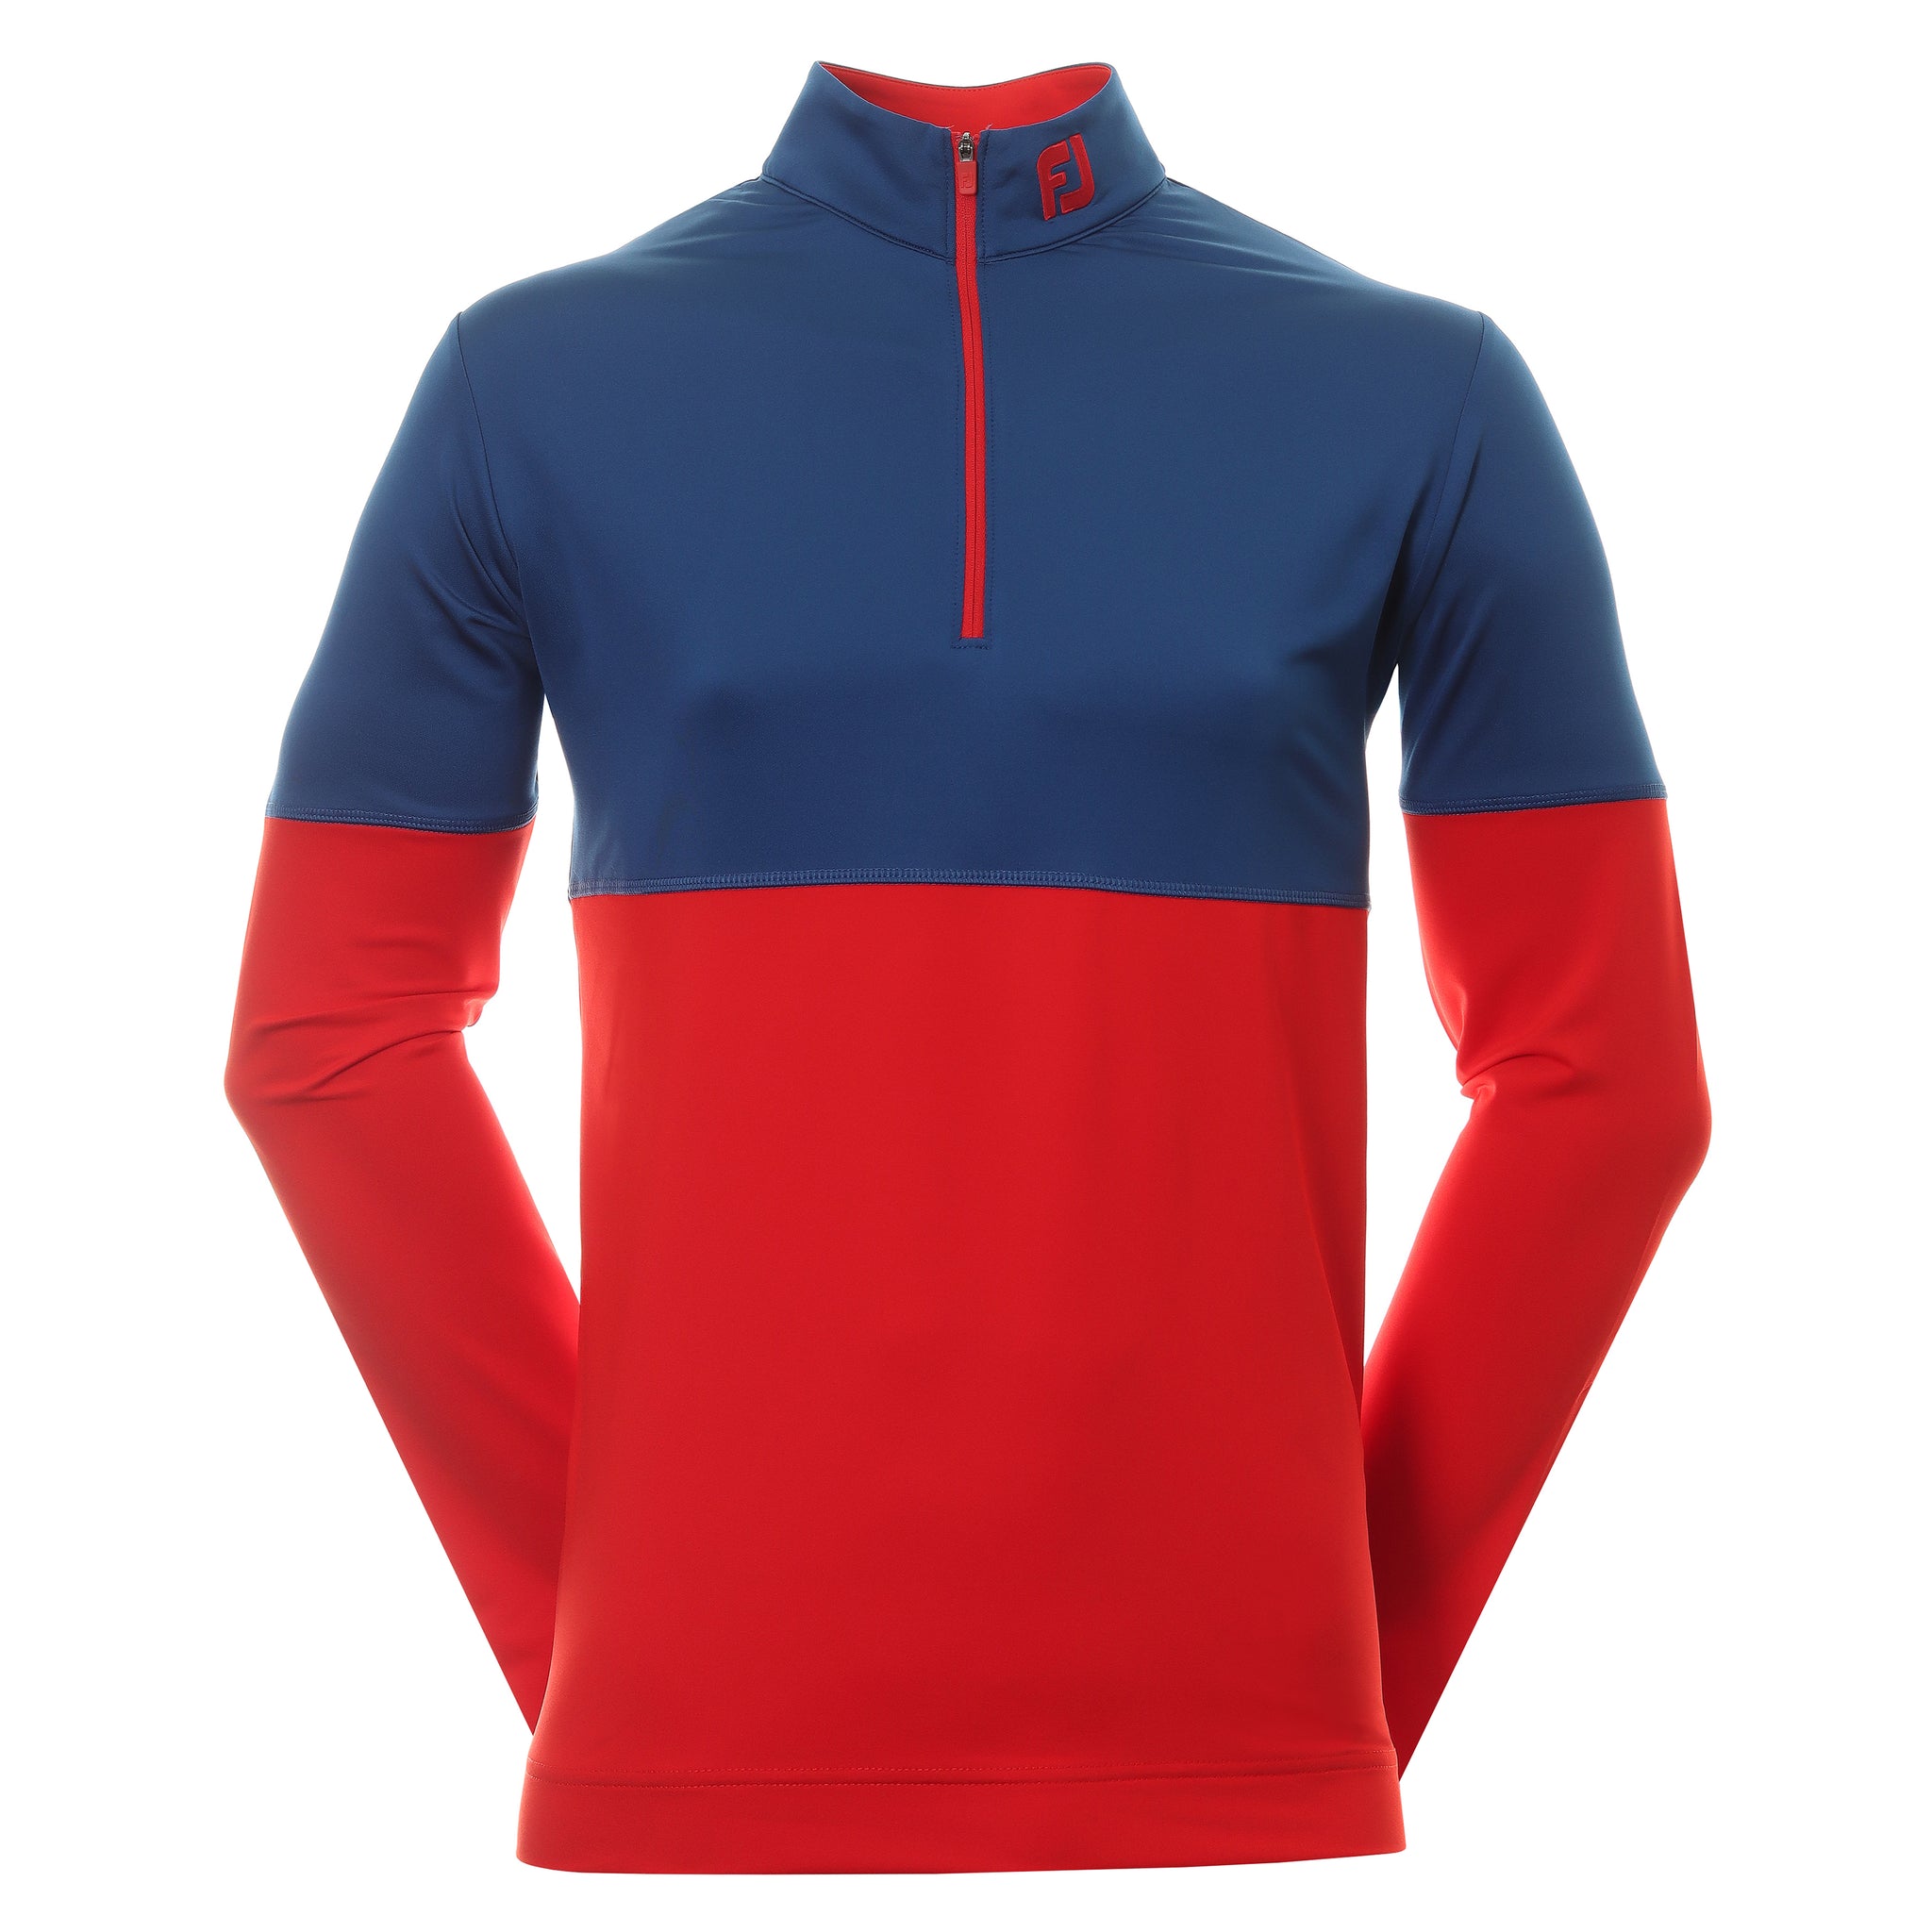 footjoy-colour-block-chill-out-pullover-80118-twilight-racing-red